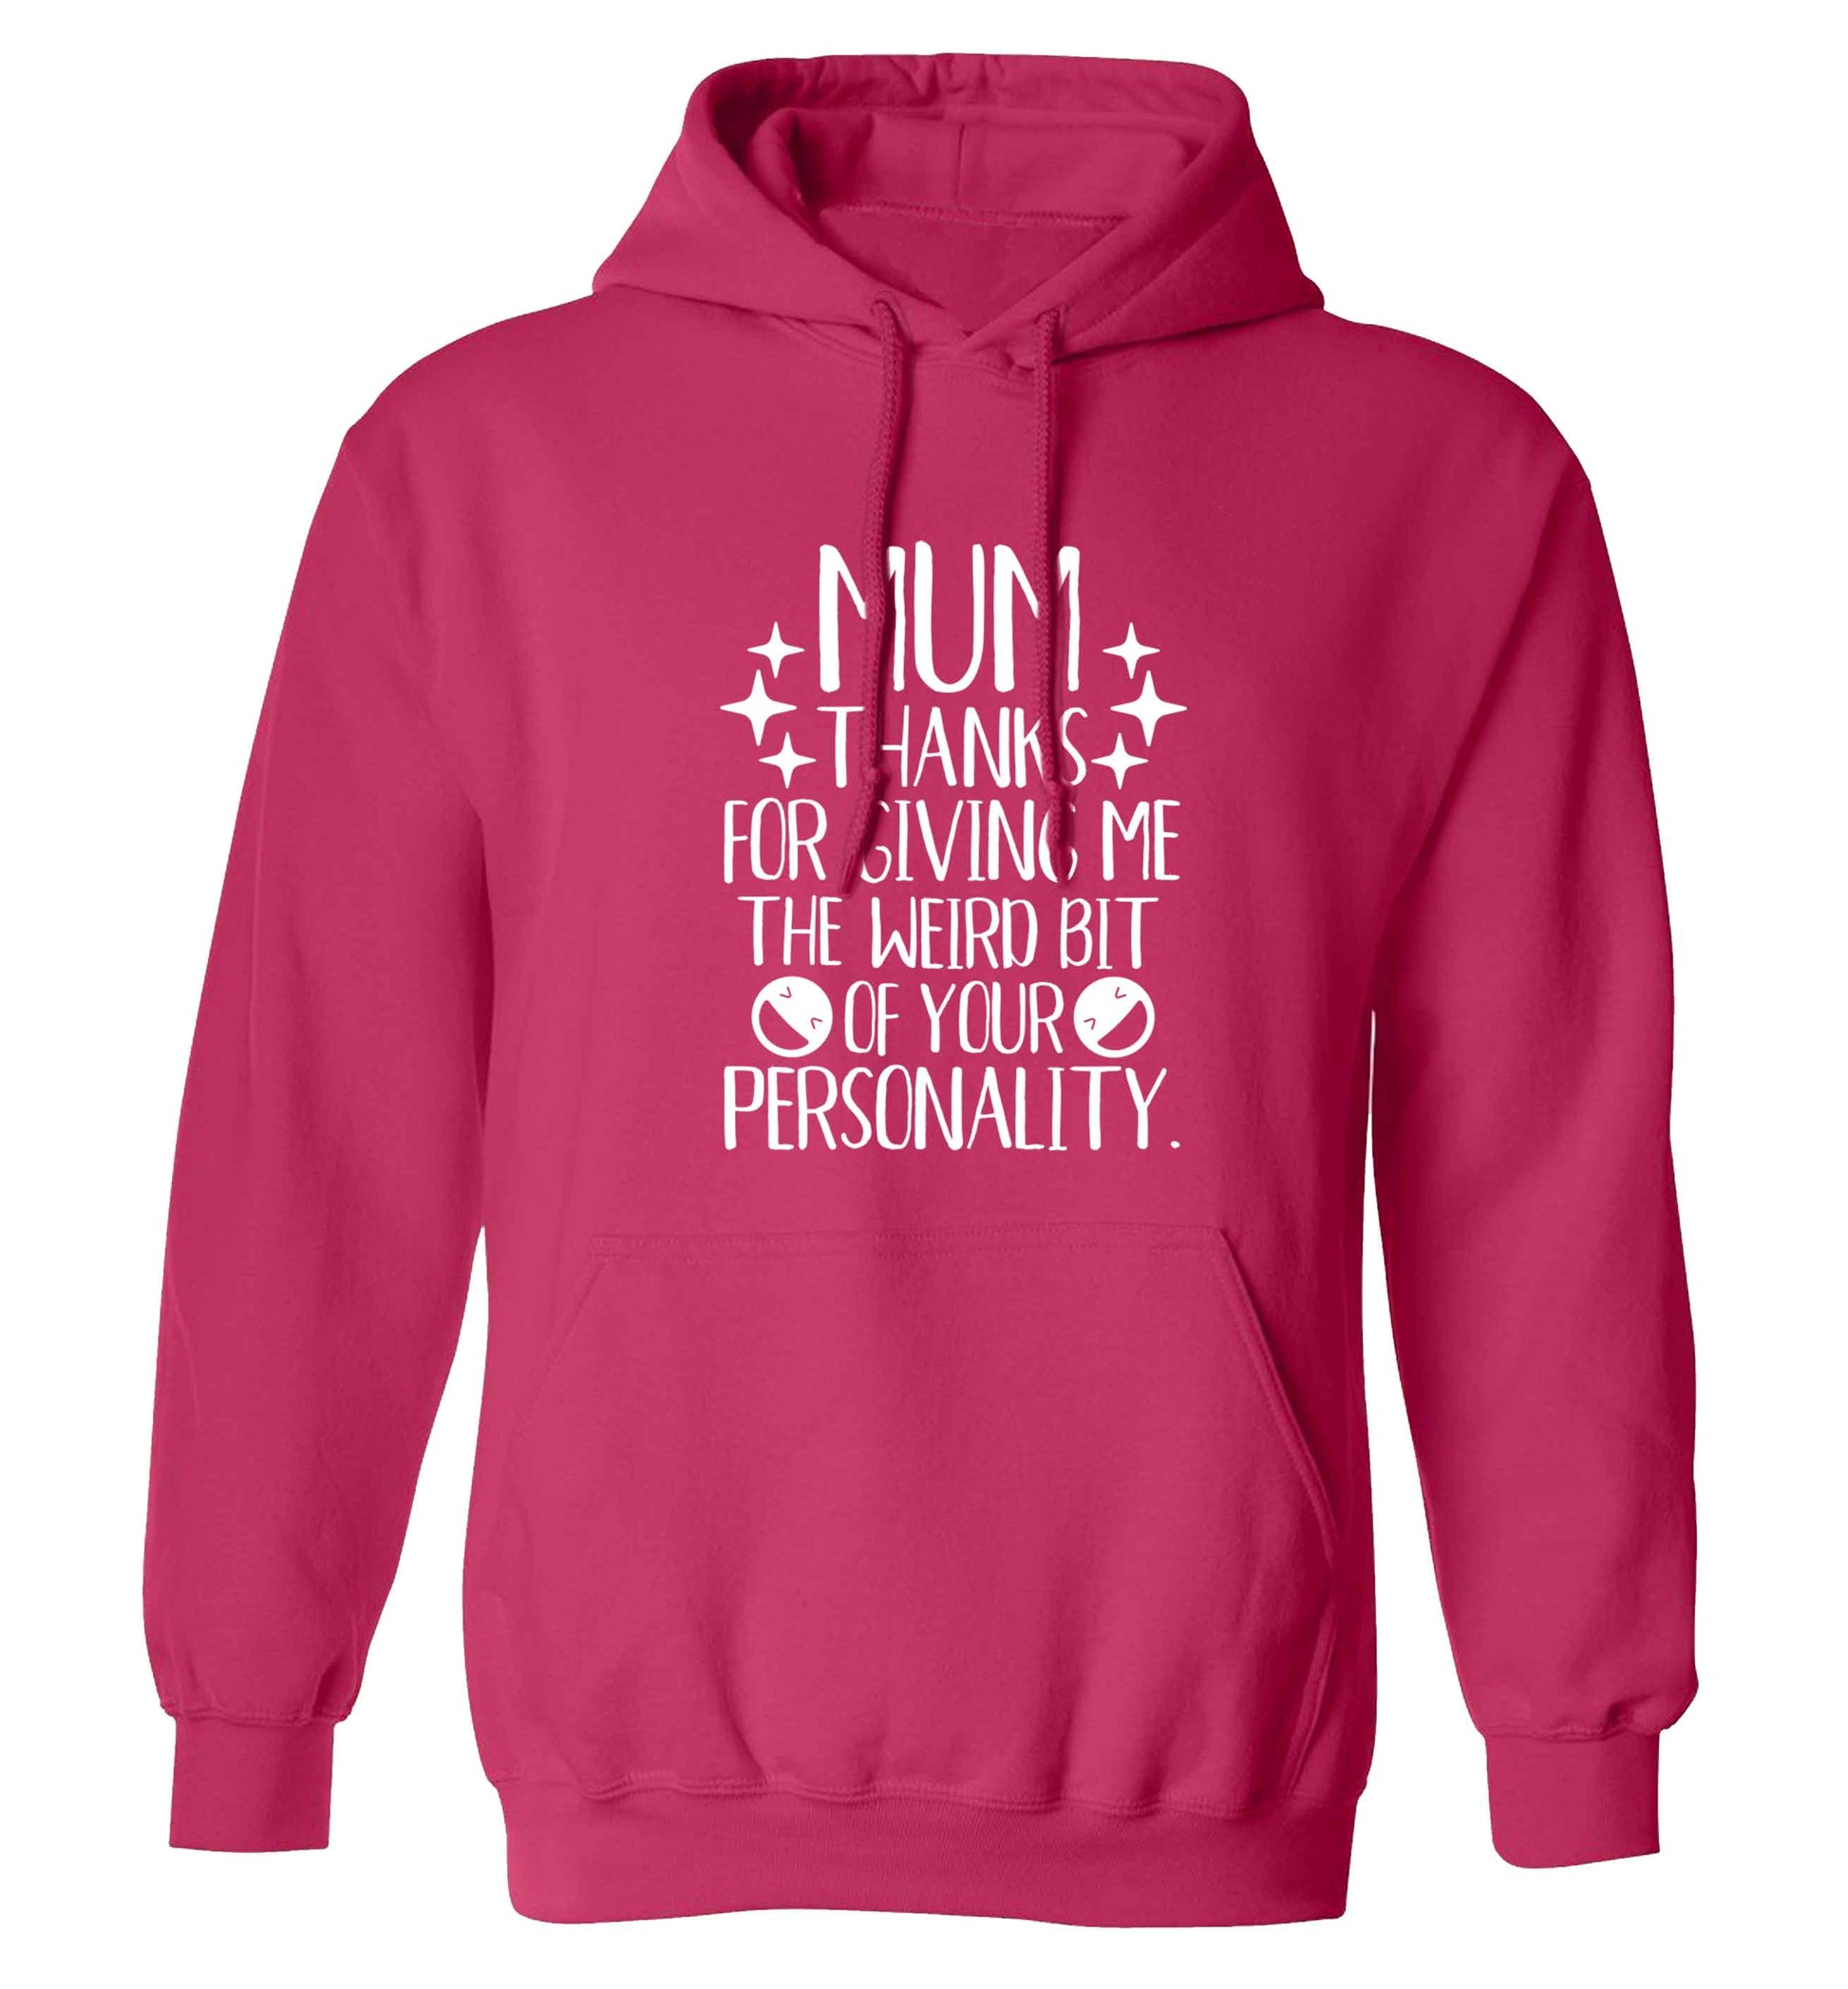 Mum thanks for giving me the weird bit of your personality adults unisex pink hoodie 2XL